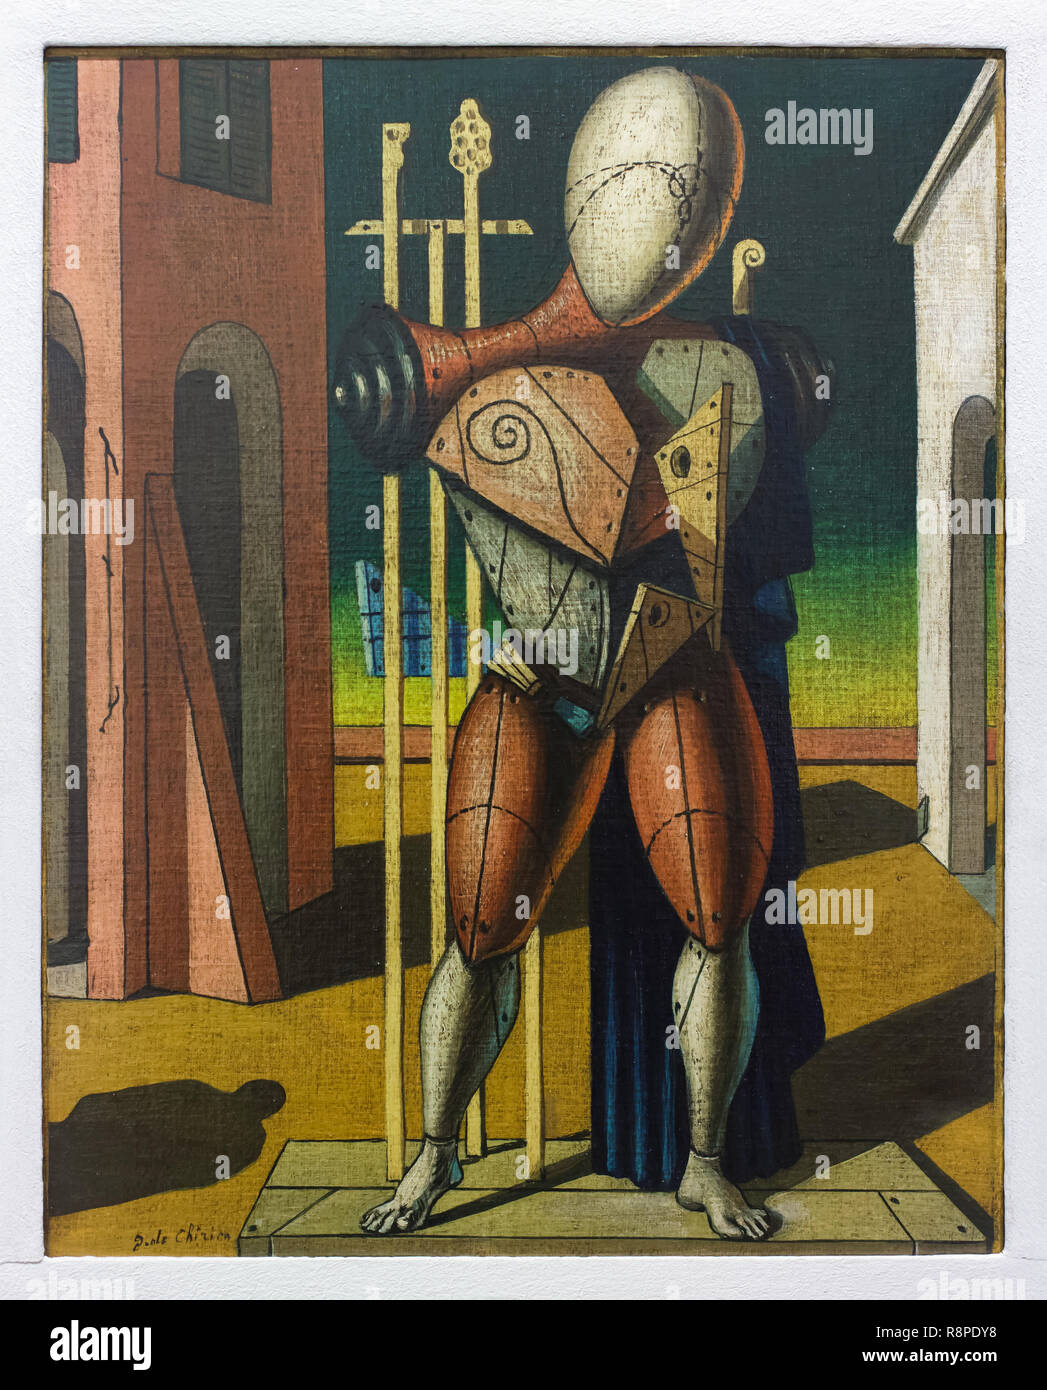 Painting 'Troubadour' by Italian modernist painter Giorgio de Chirico (1950) on display in the International Gallery of Modern Art (Galleria internazionale d'arte moderna) in the Ca' Pesaro (Pesaro Palace) in Venice, Italy. Stock Photo